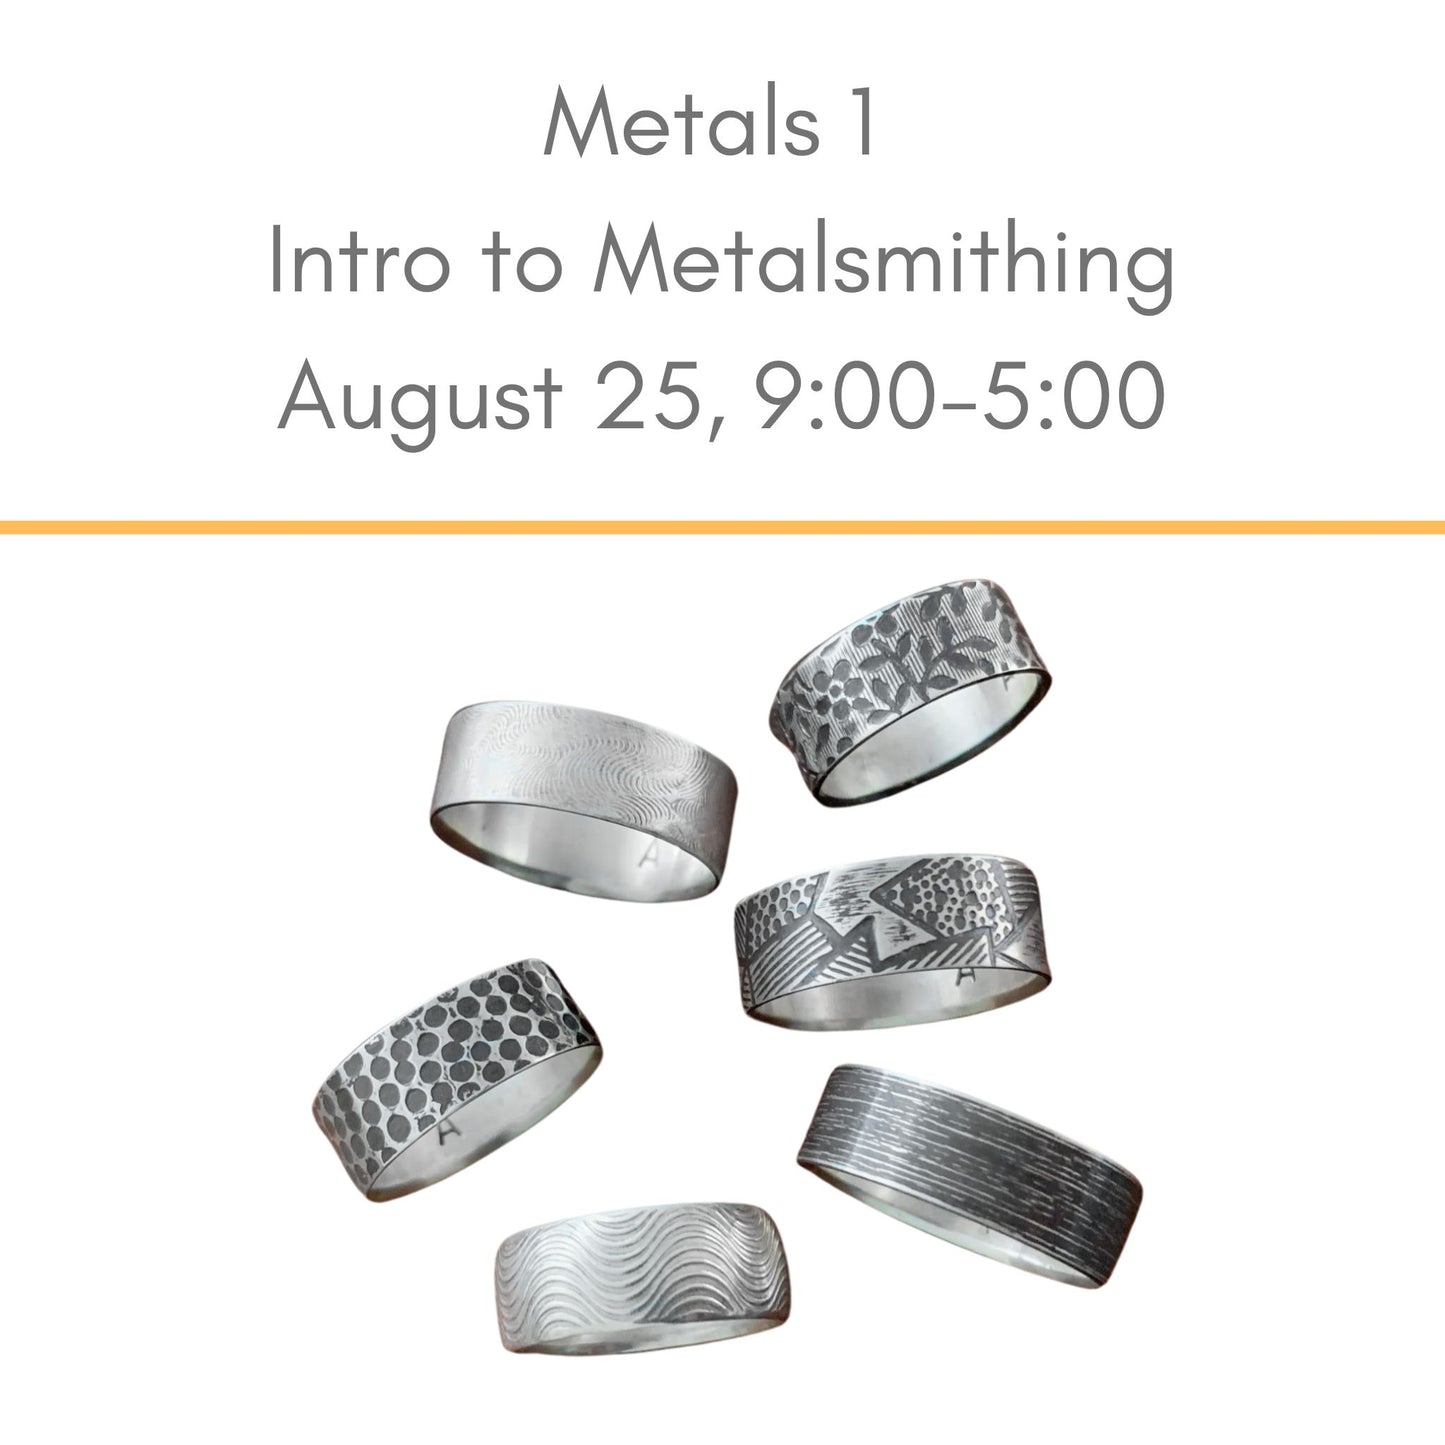 Intro to Metalsmithing August 25